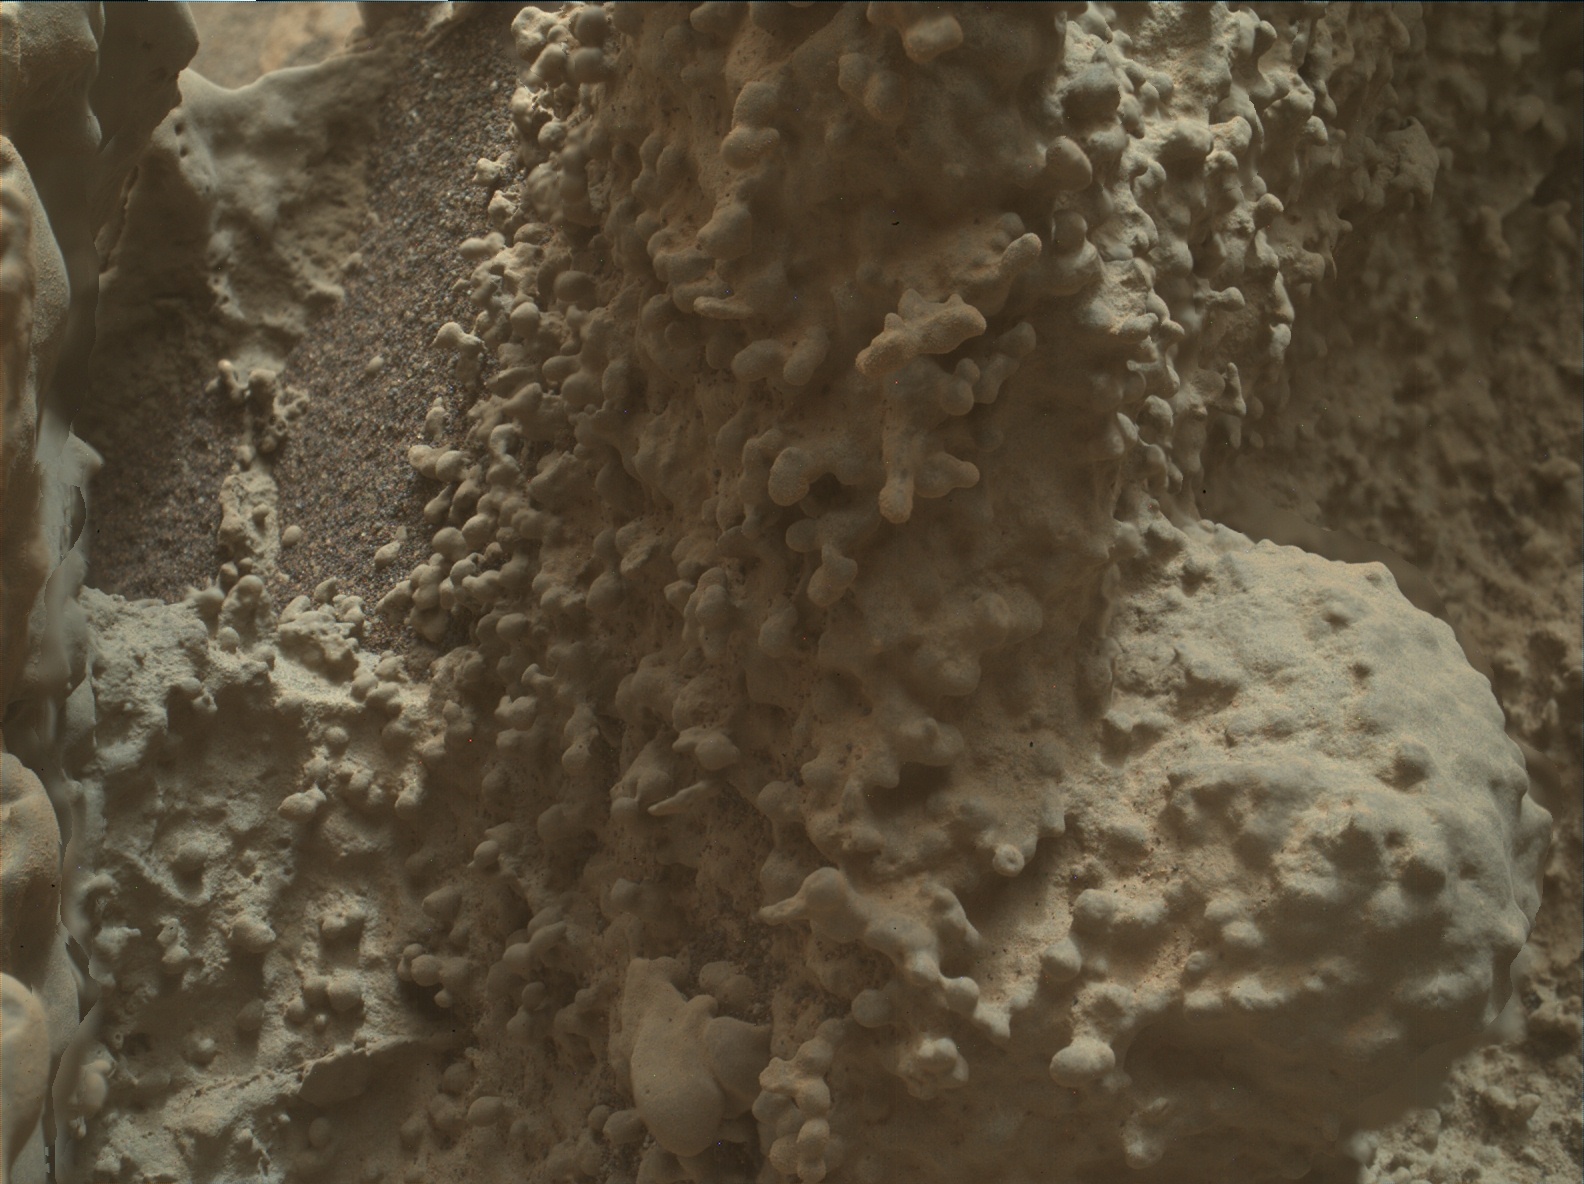 Nasa's Mars rover Curiosity acquired this image using its Mars Hand Lens Imager (MAHLI) on Sol 2664